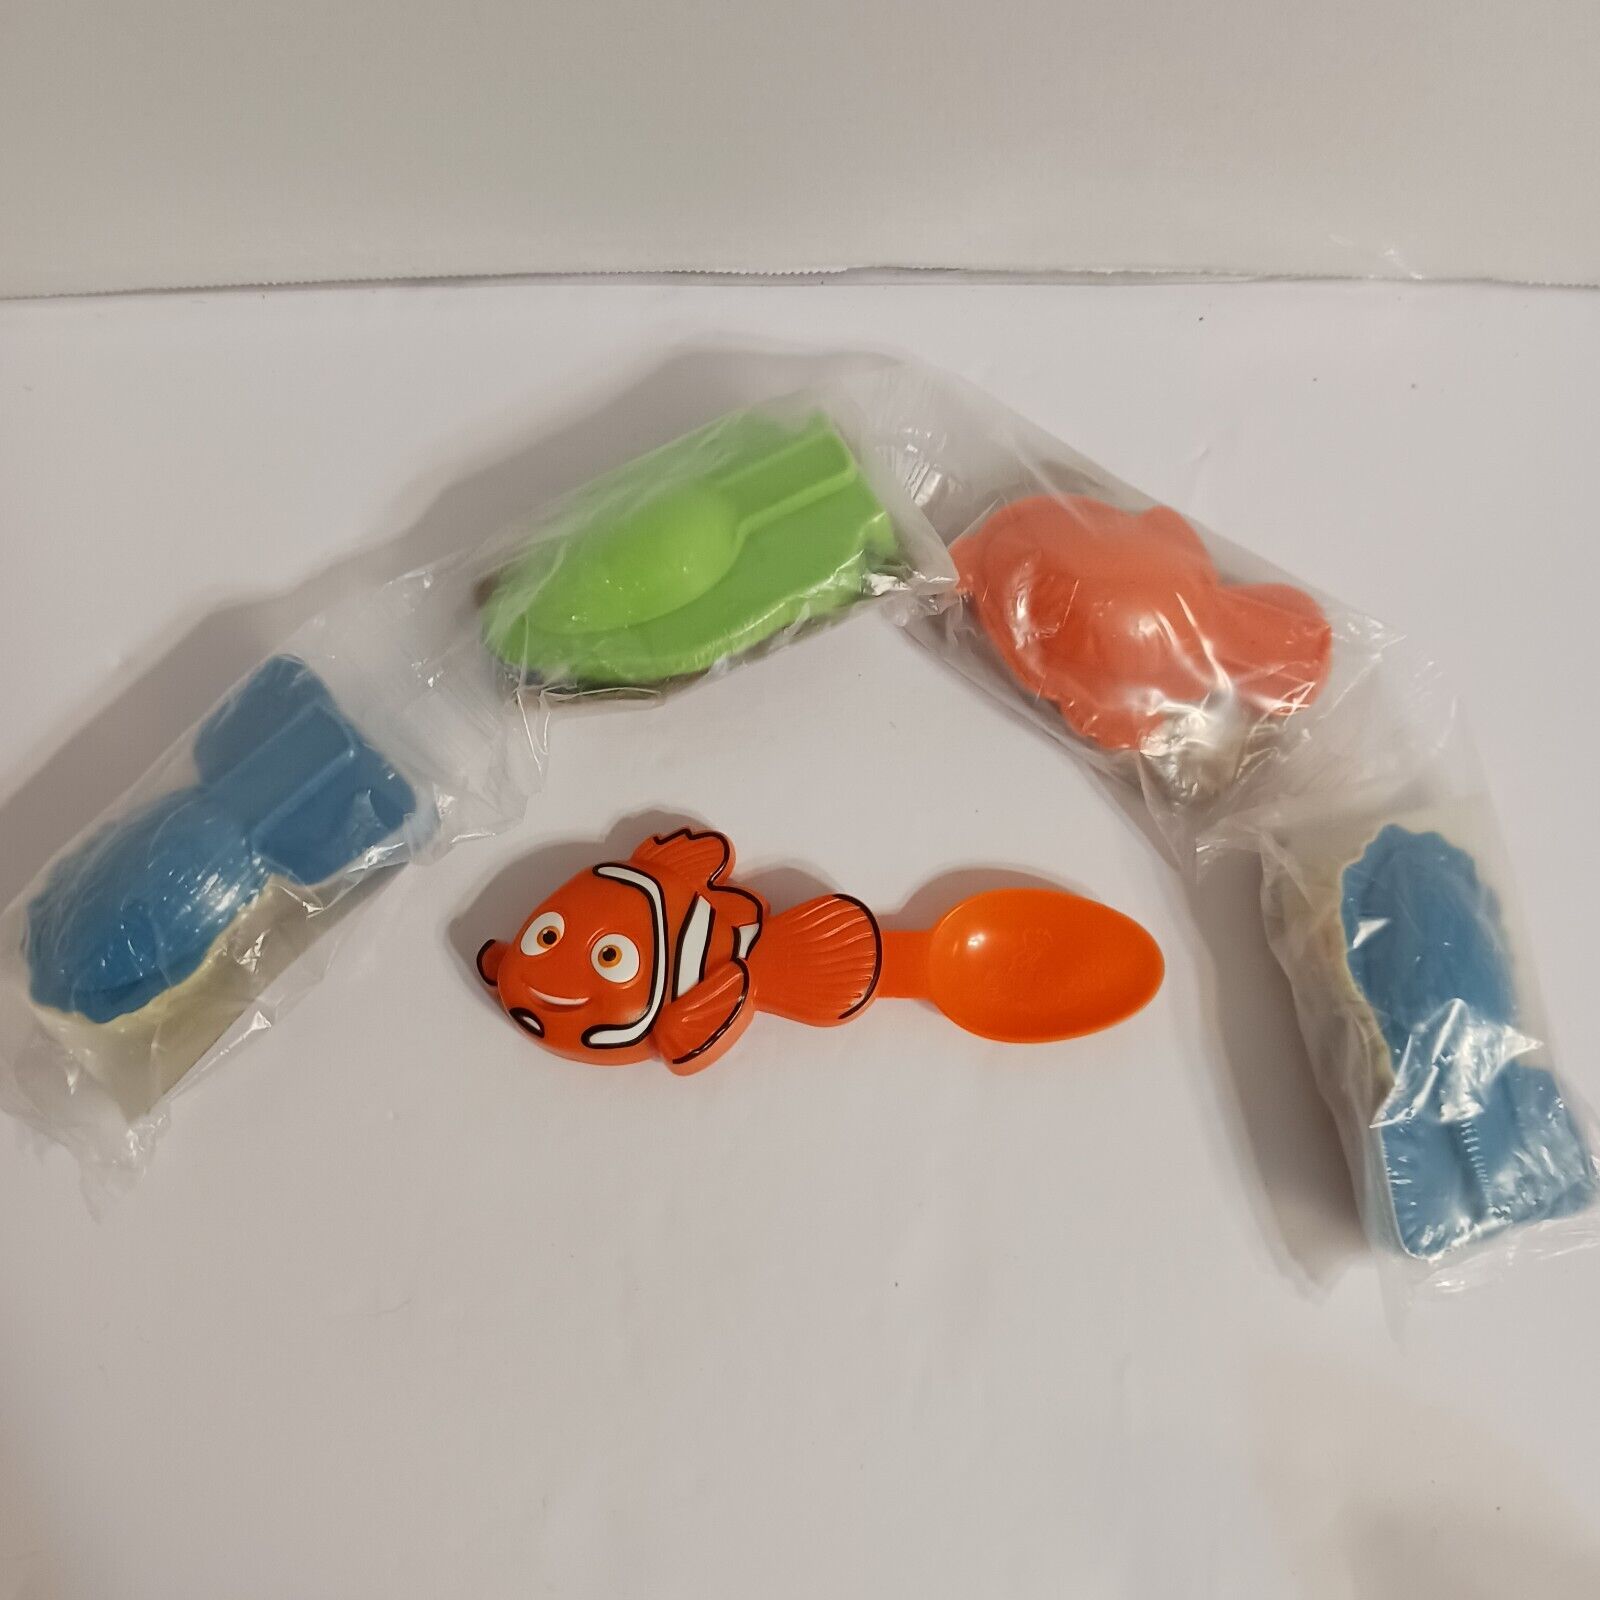 Kellogg’s Cereal 2014 Disney Parks Spoons 1 Mike 2 Nemo 2 Elsa NEW in Package